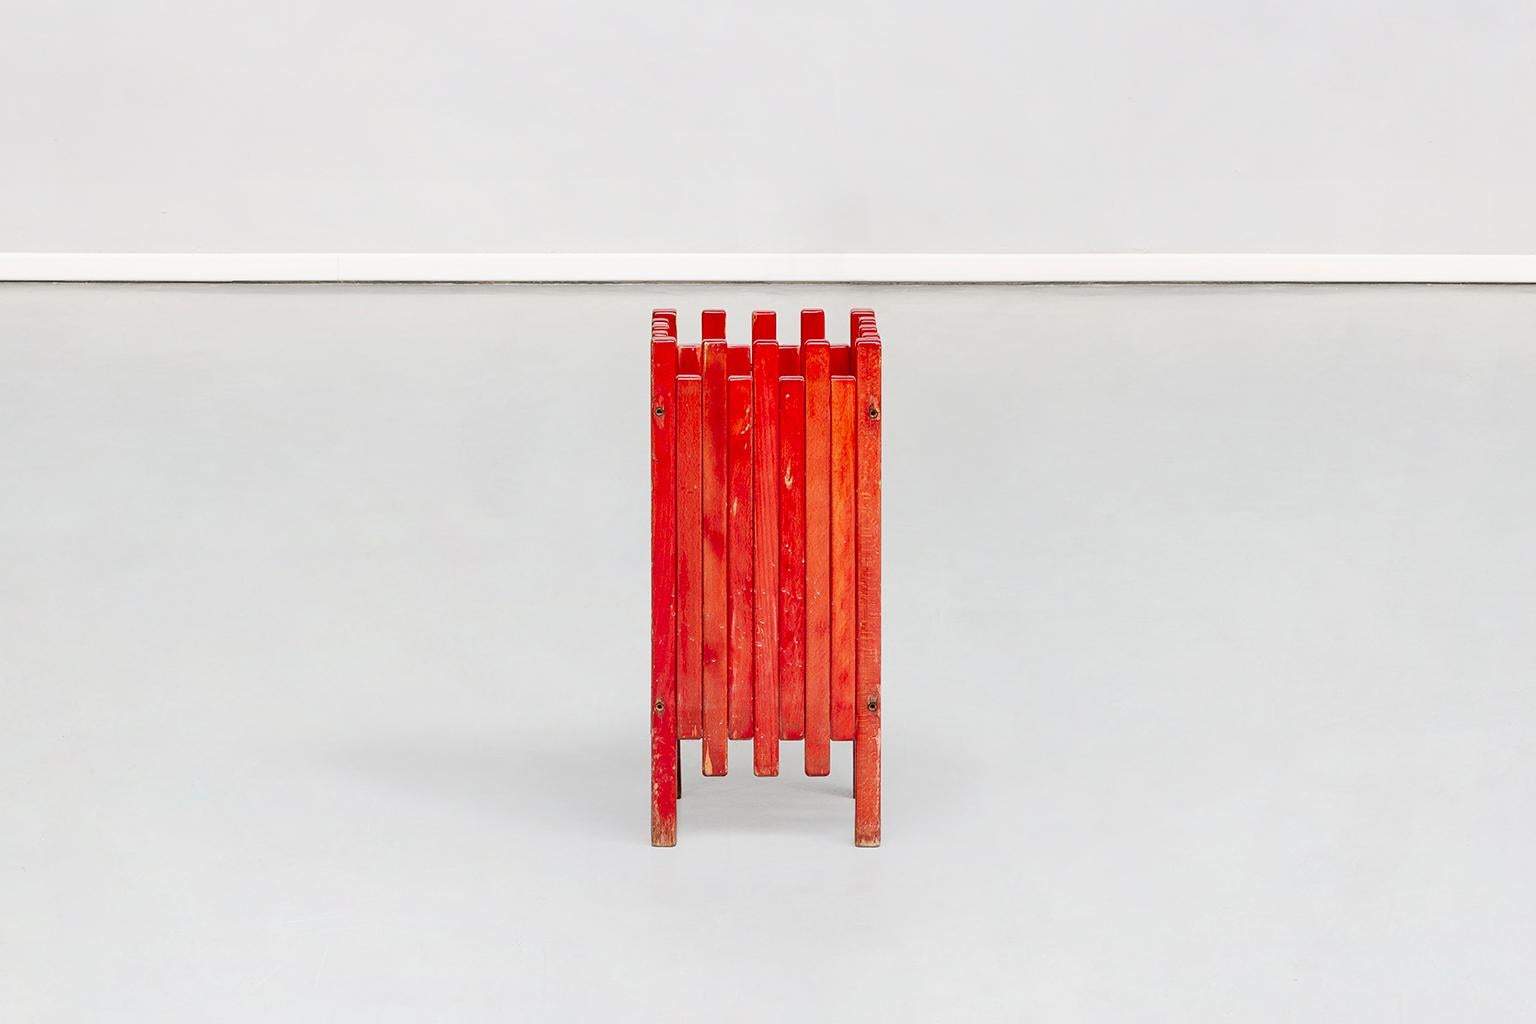 Italian umbrella-stand in red painted wood, designed by Ettore Sottsass for Poltronova in 1962; the umbrella-stand takes up the unique style of Ettore Sottsass, that is linear, minimal and geometrical. The wood axes of different heights enlive and